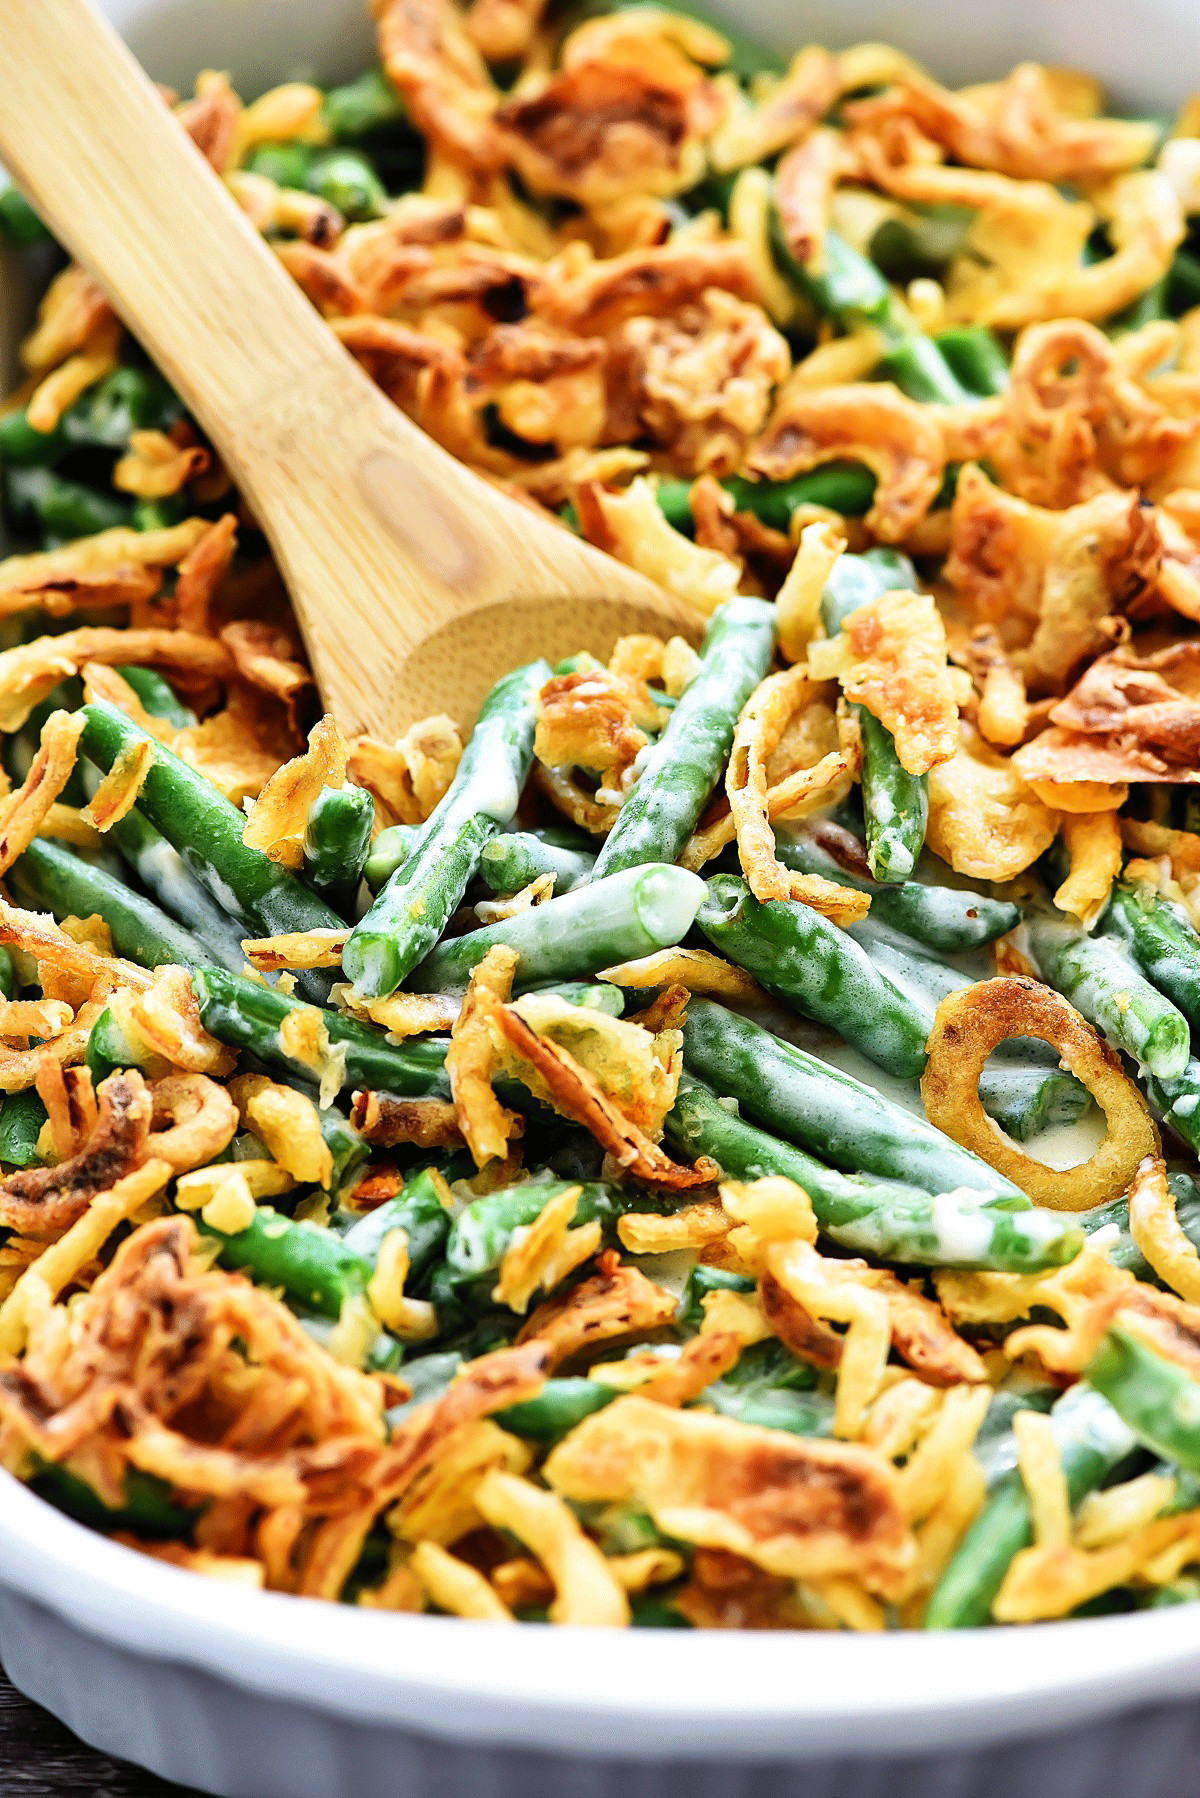 Green Bean Casserole with Canned Green Beans Unique the Best Green Bean Casserole — Recipes